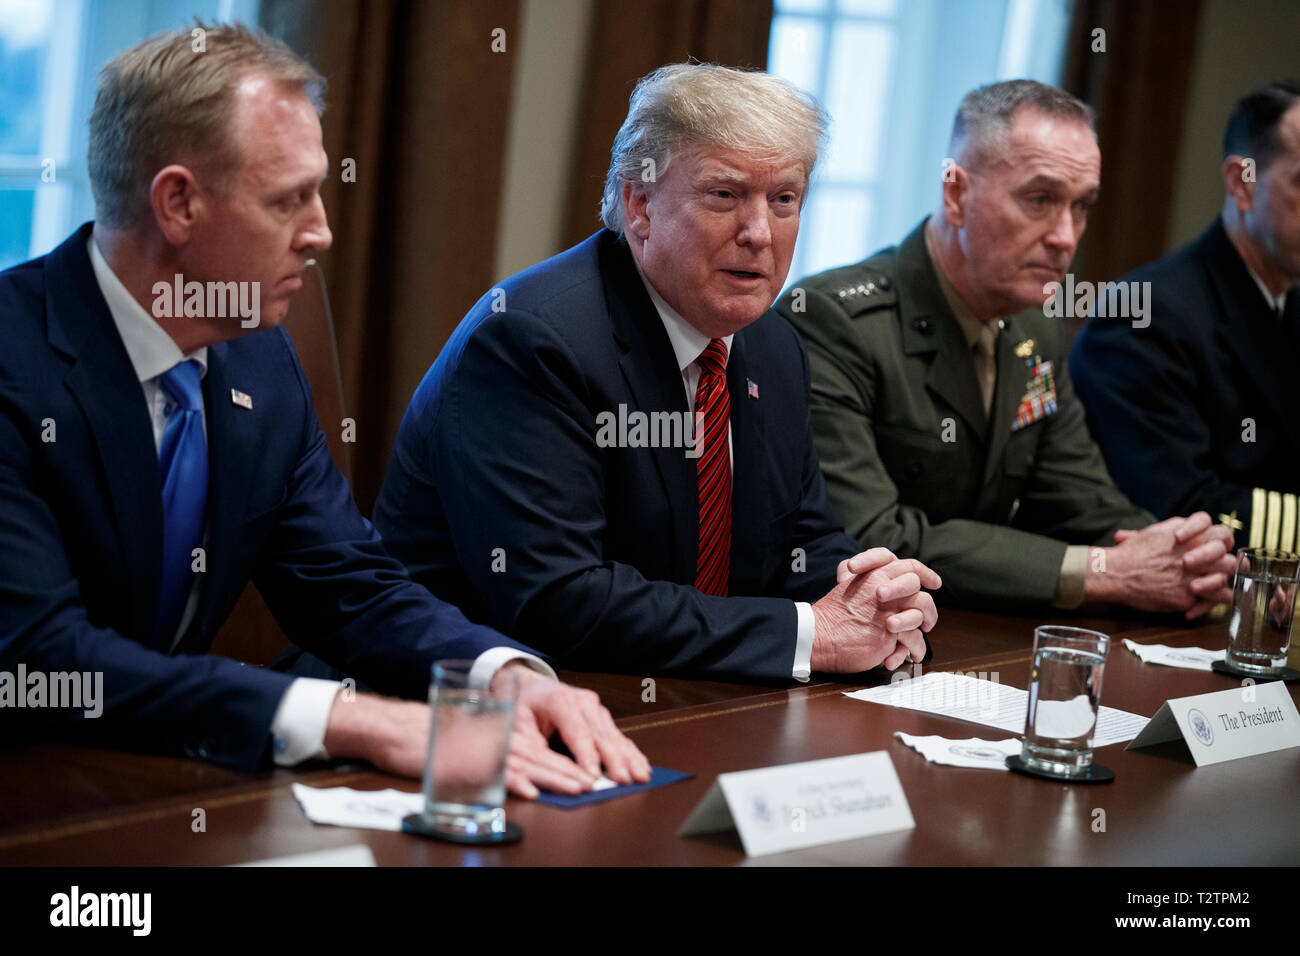 Washington, DC, USA. 03rd Apr, 2019. US President Donald J. Trump (C), with Acting Secretary of Defense Patrick Shanahan (L) and Chairman of the Joint Chiefs of Staff General Joseph Dunford (R), delivers remarks during a briefing by senior military leaders in the Cabinet Room of the White House in Washington, DC, USA, 03 April 2019. Following the briefing President Trump will host a dinner for the officials. Credit: Shawn Thew/Pool via CNP | usage worldwide Credit: dpa/Alamy Live News Stock Photo